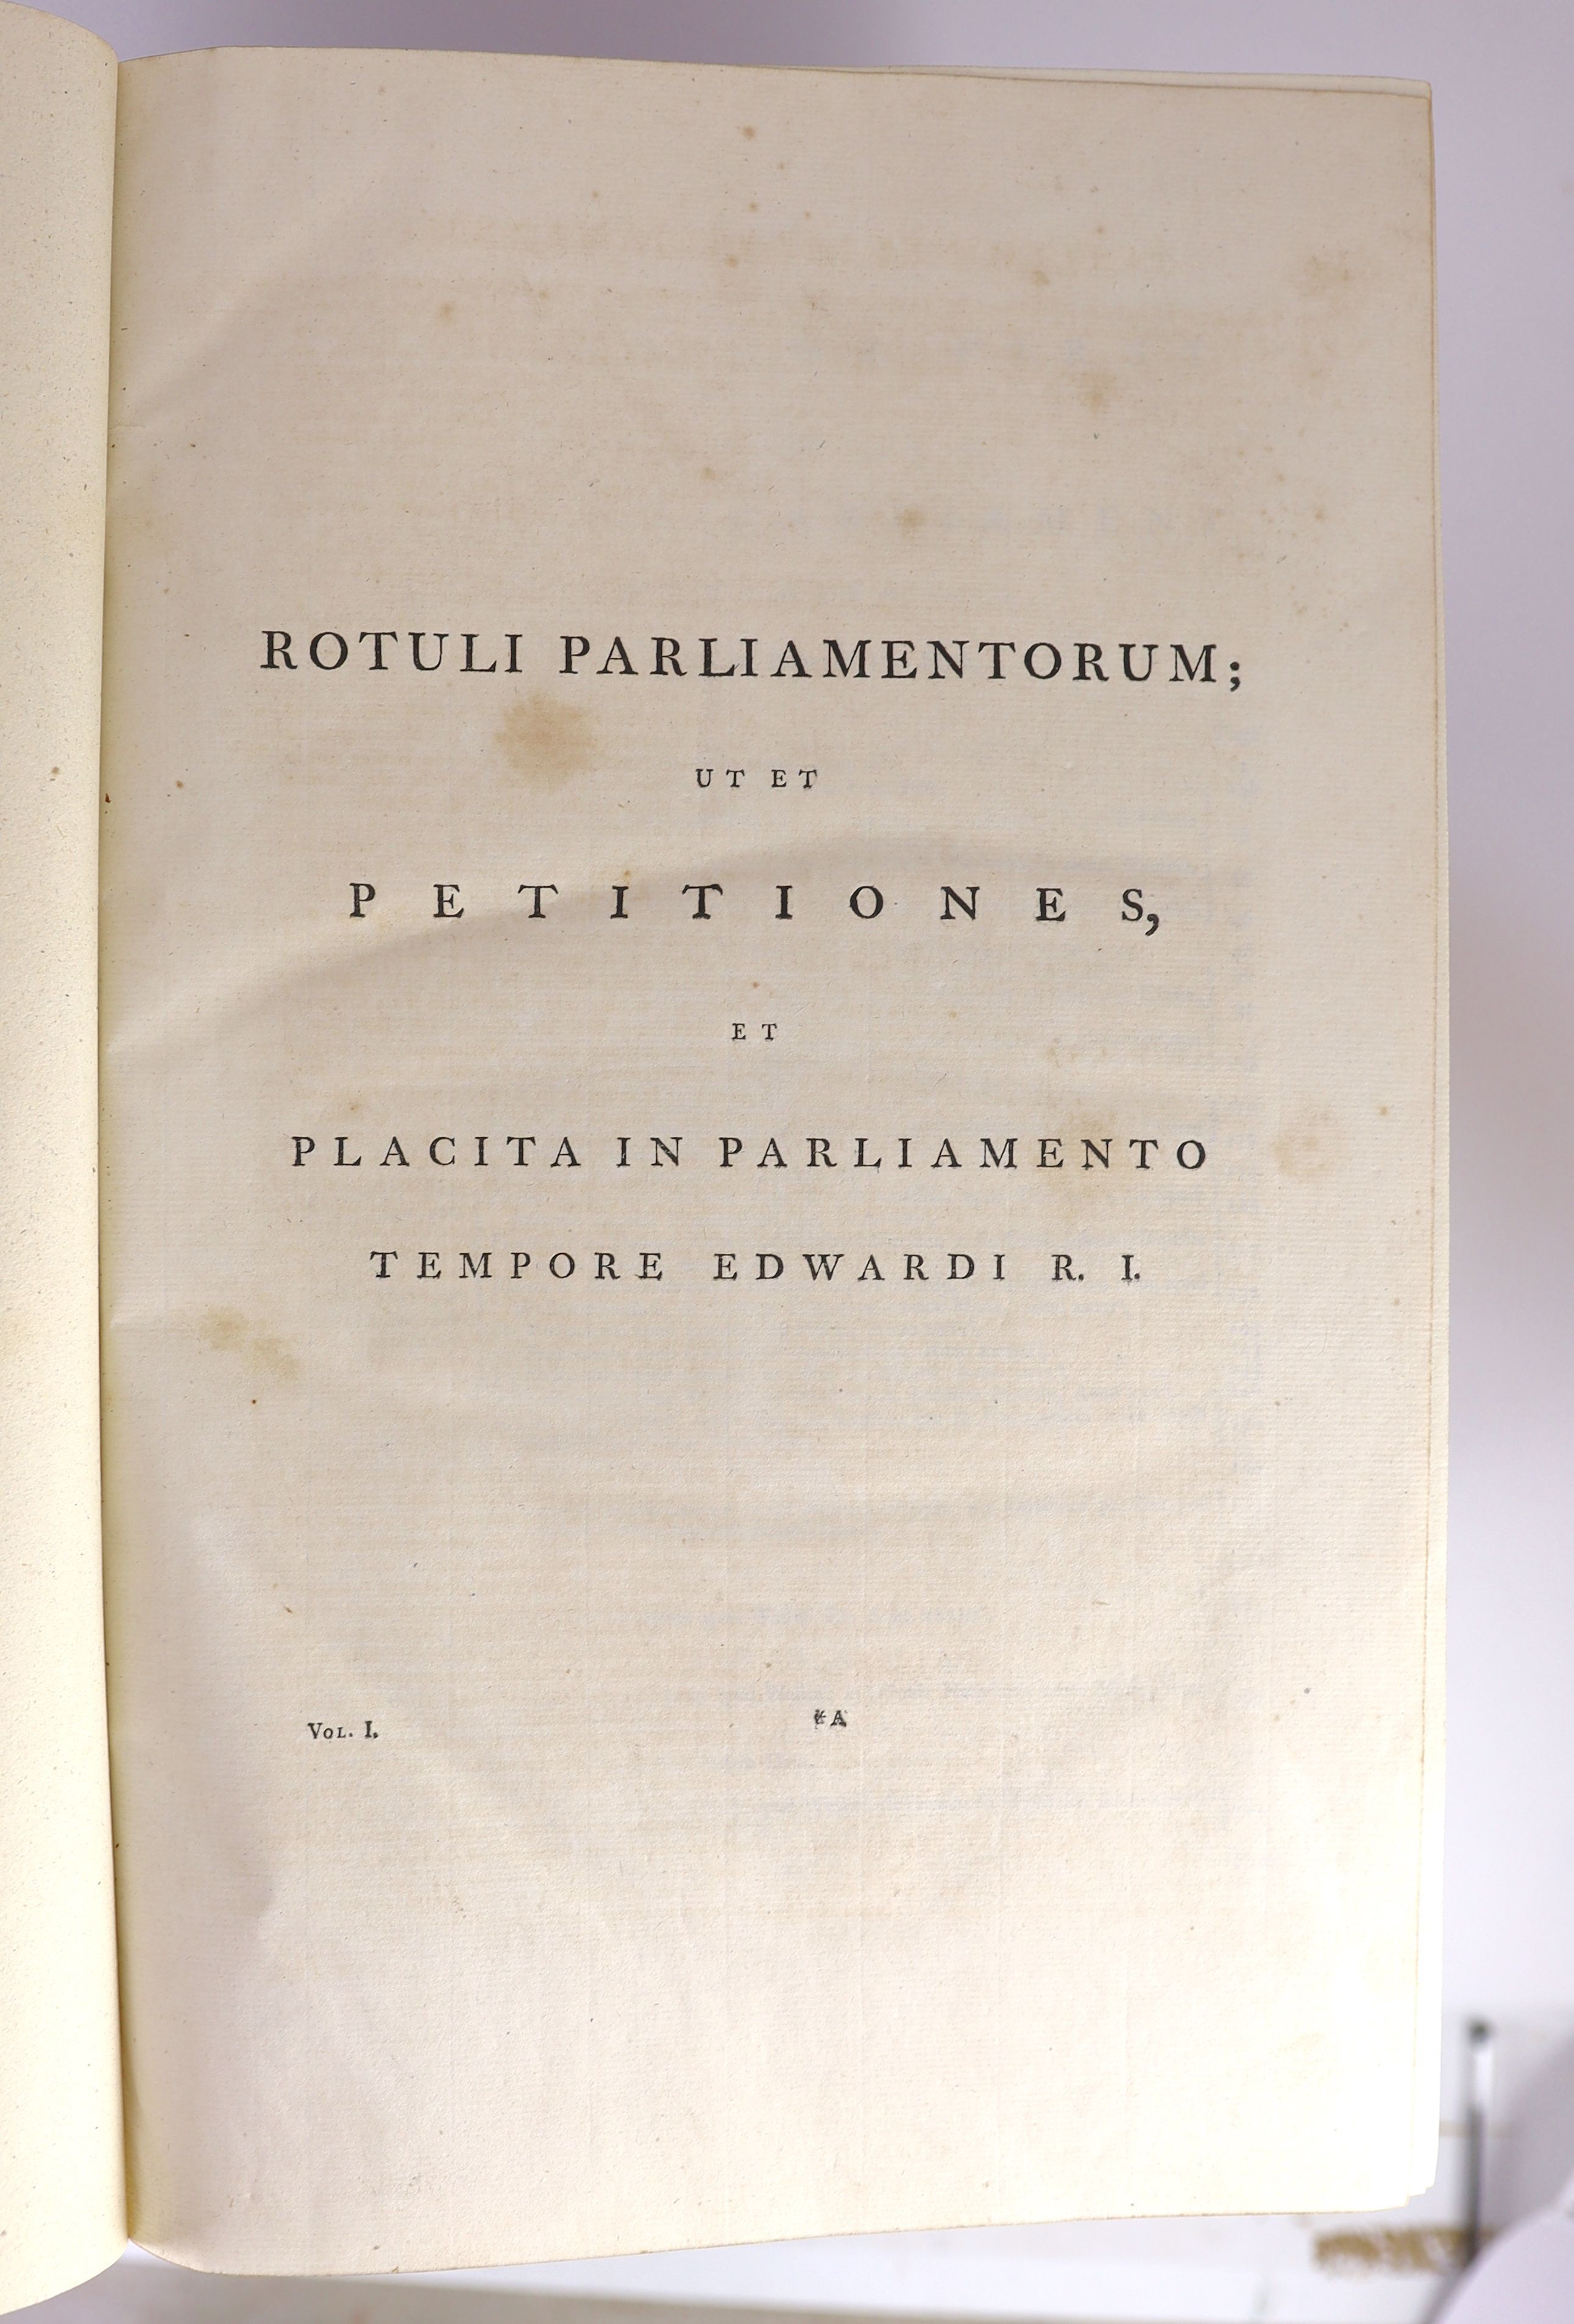 (Rolls Series) Rotuli Parliamentorum; ut et Petitiones et Placita Parliamentorum....7 vols. (incl. Index). vol 4 with 4 engraved plates of seals; old half calf and marbled boards, gilt ruled panelled spines with maroon l